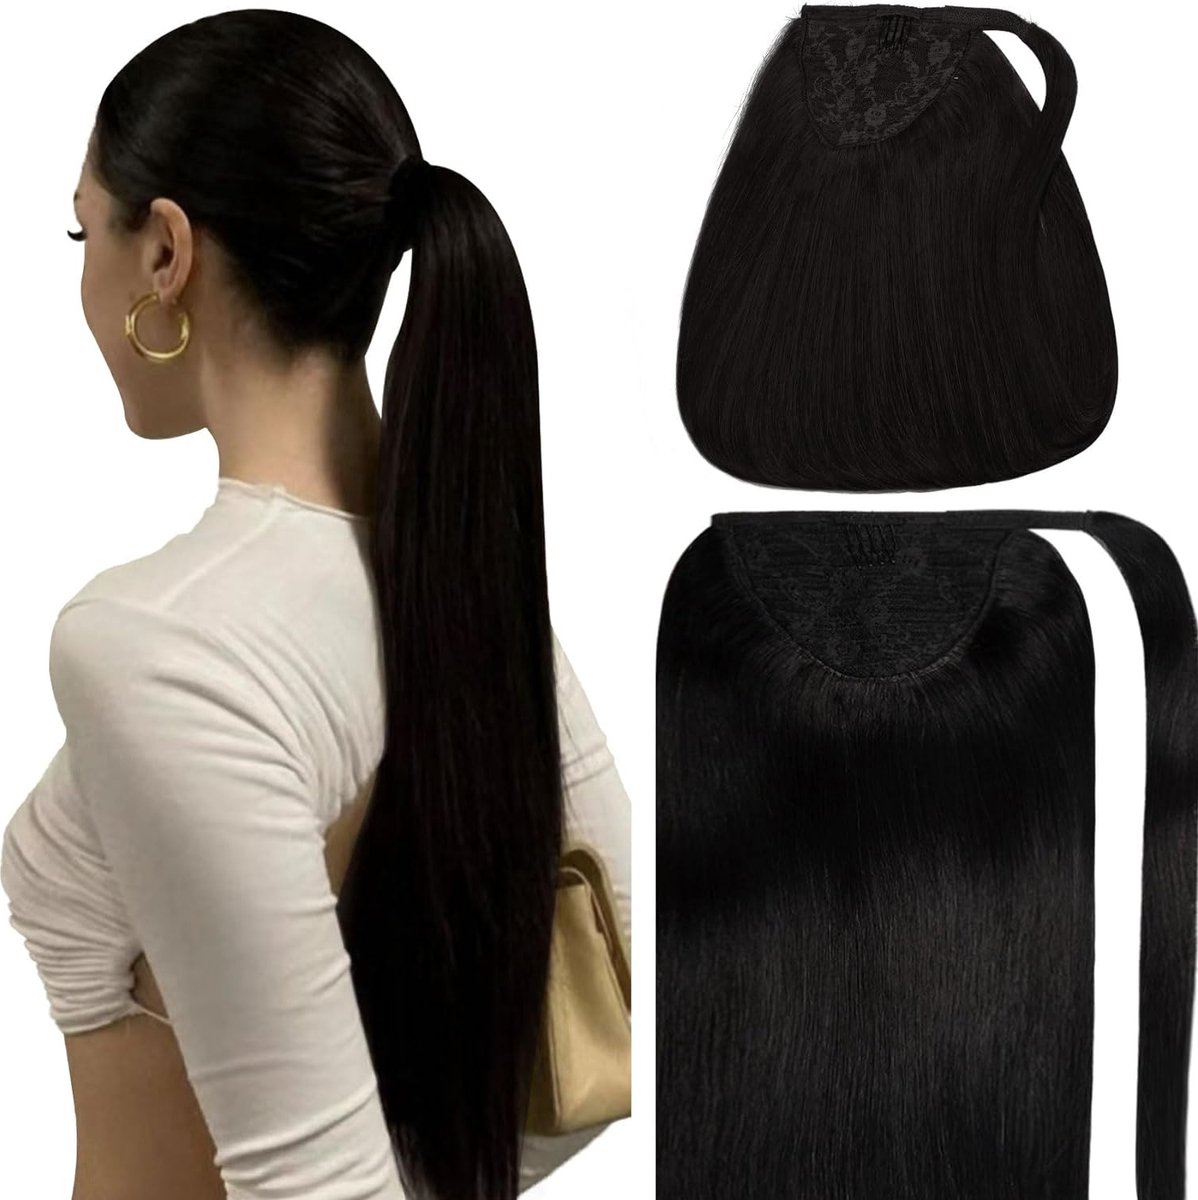 Vivendi Ponytail Clip In Hairextensions |Human Hair Echt Haar |Wrap Around Hairextensions | 22